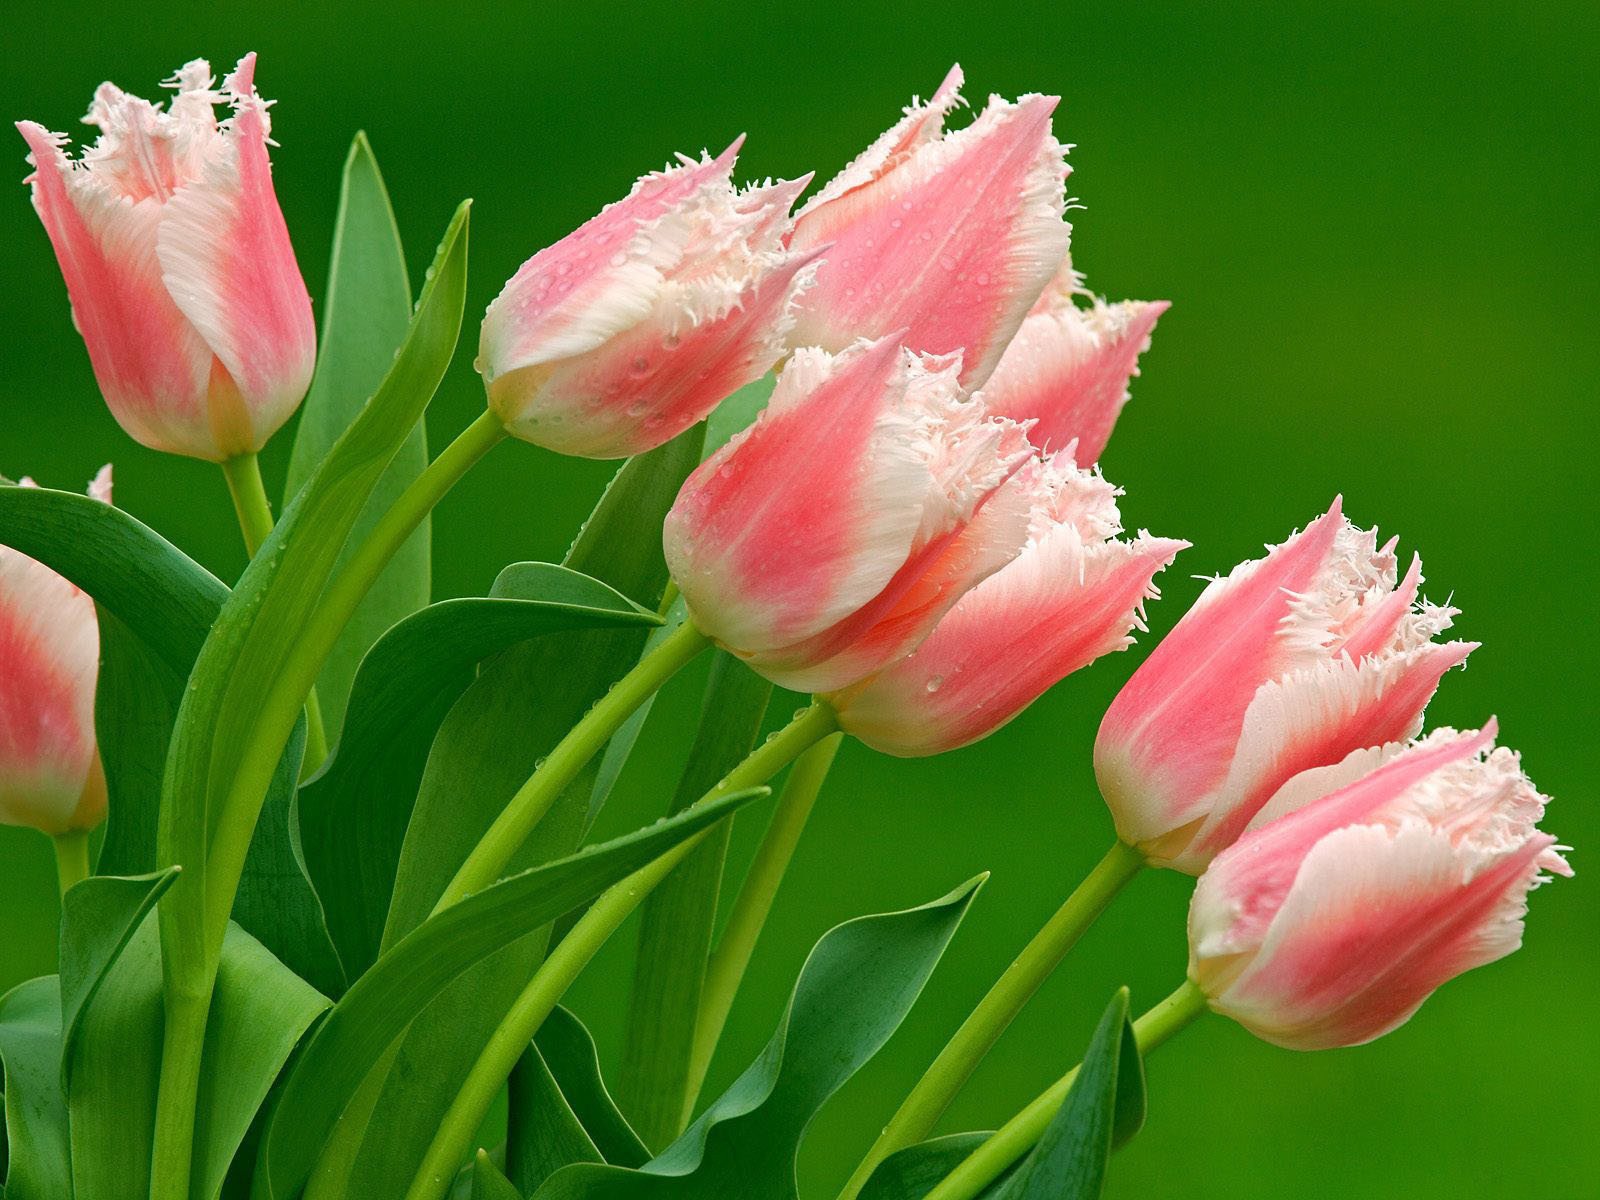 Pink and white terry tulips on a green background